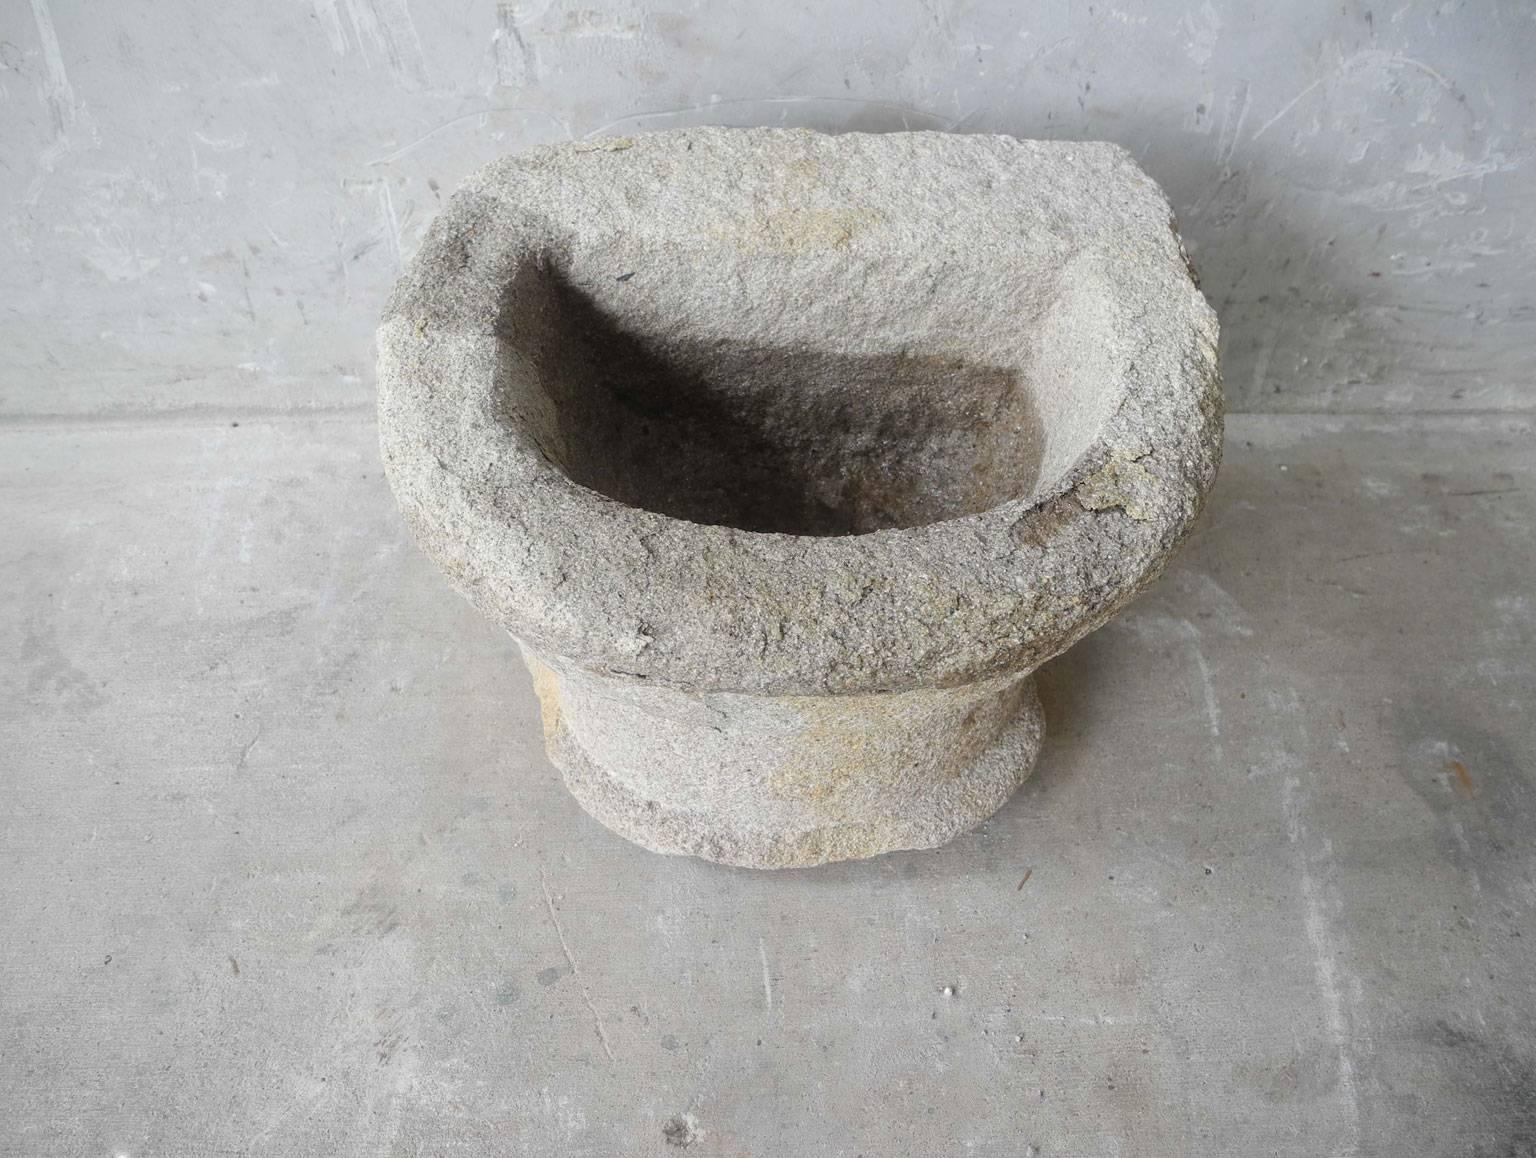 This is tiny and lovely 17th century antique baptismal font (benetier) stone element from a church near Uzes, France. It is so small it can be used to hold a small plant or to display as decor as well. It has a remarkably historical feel and would